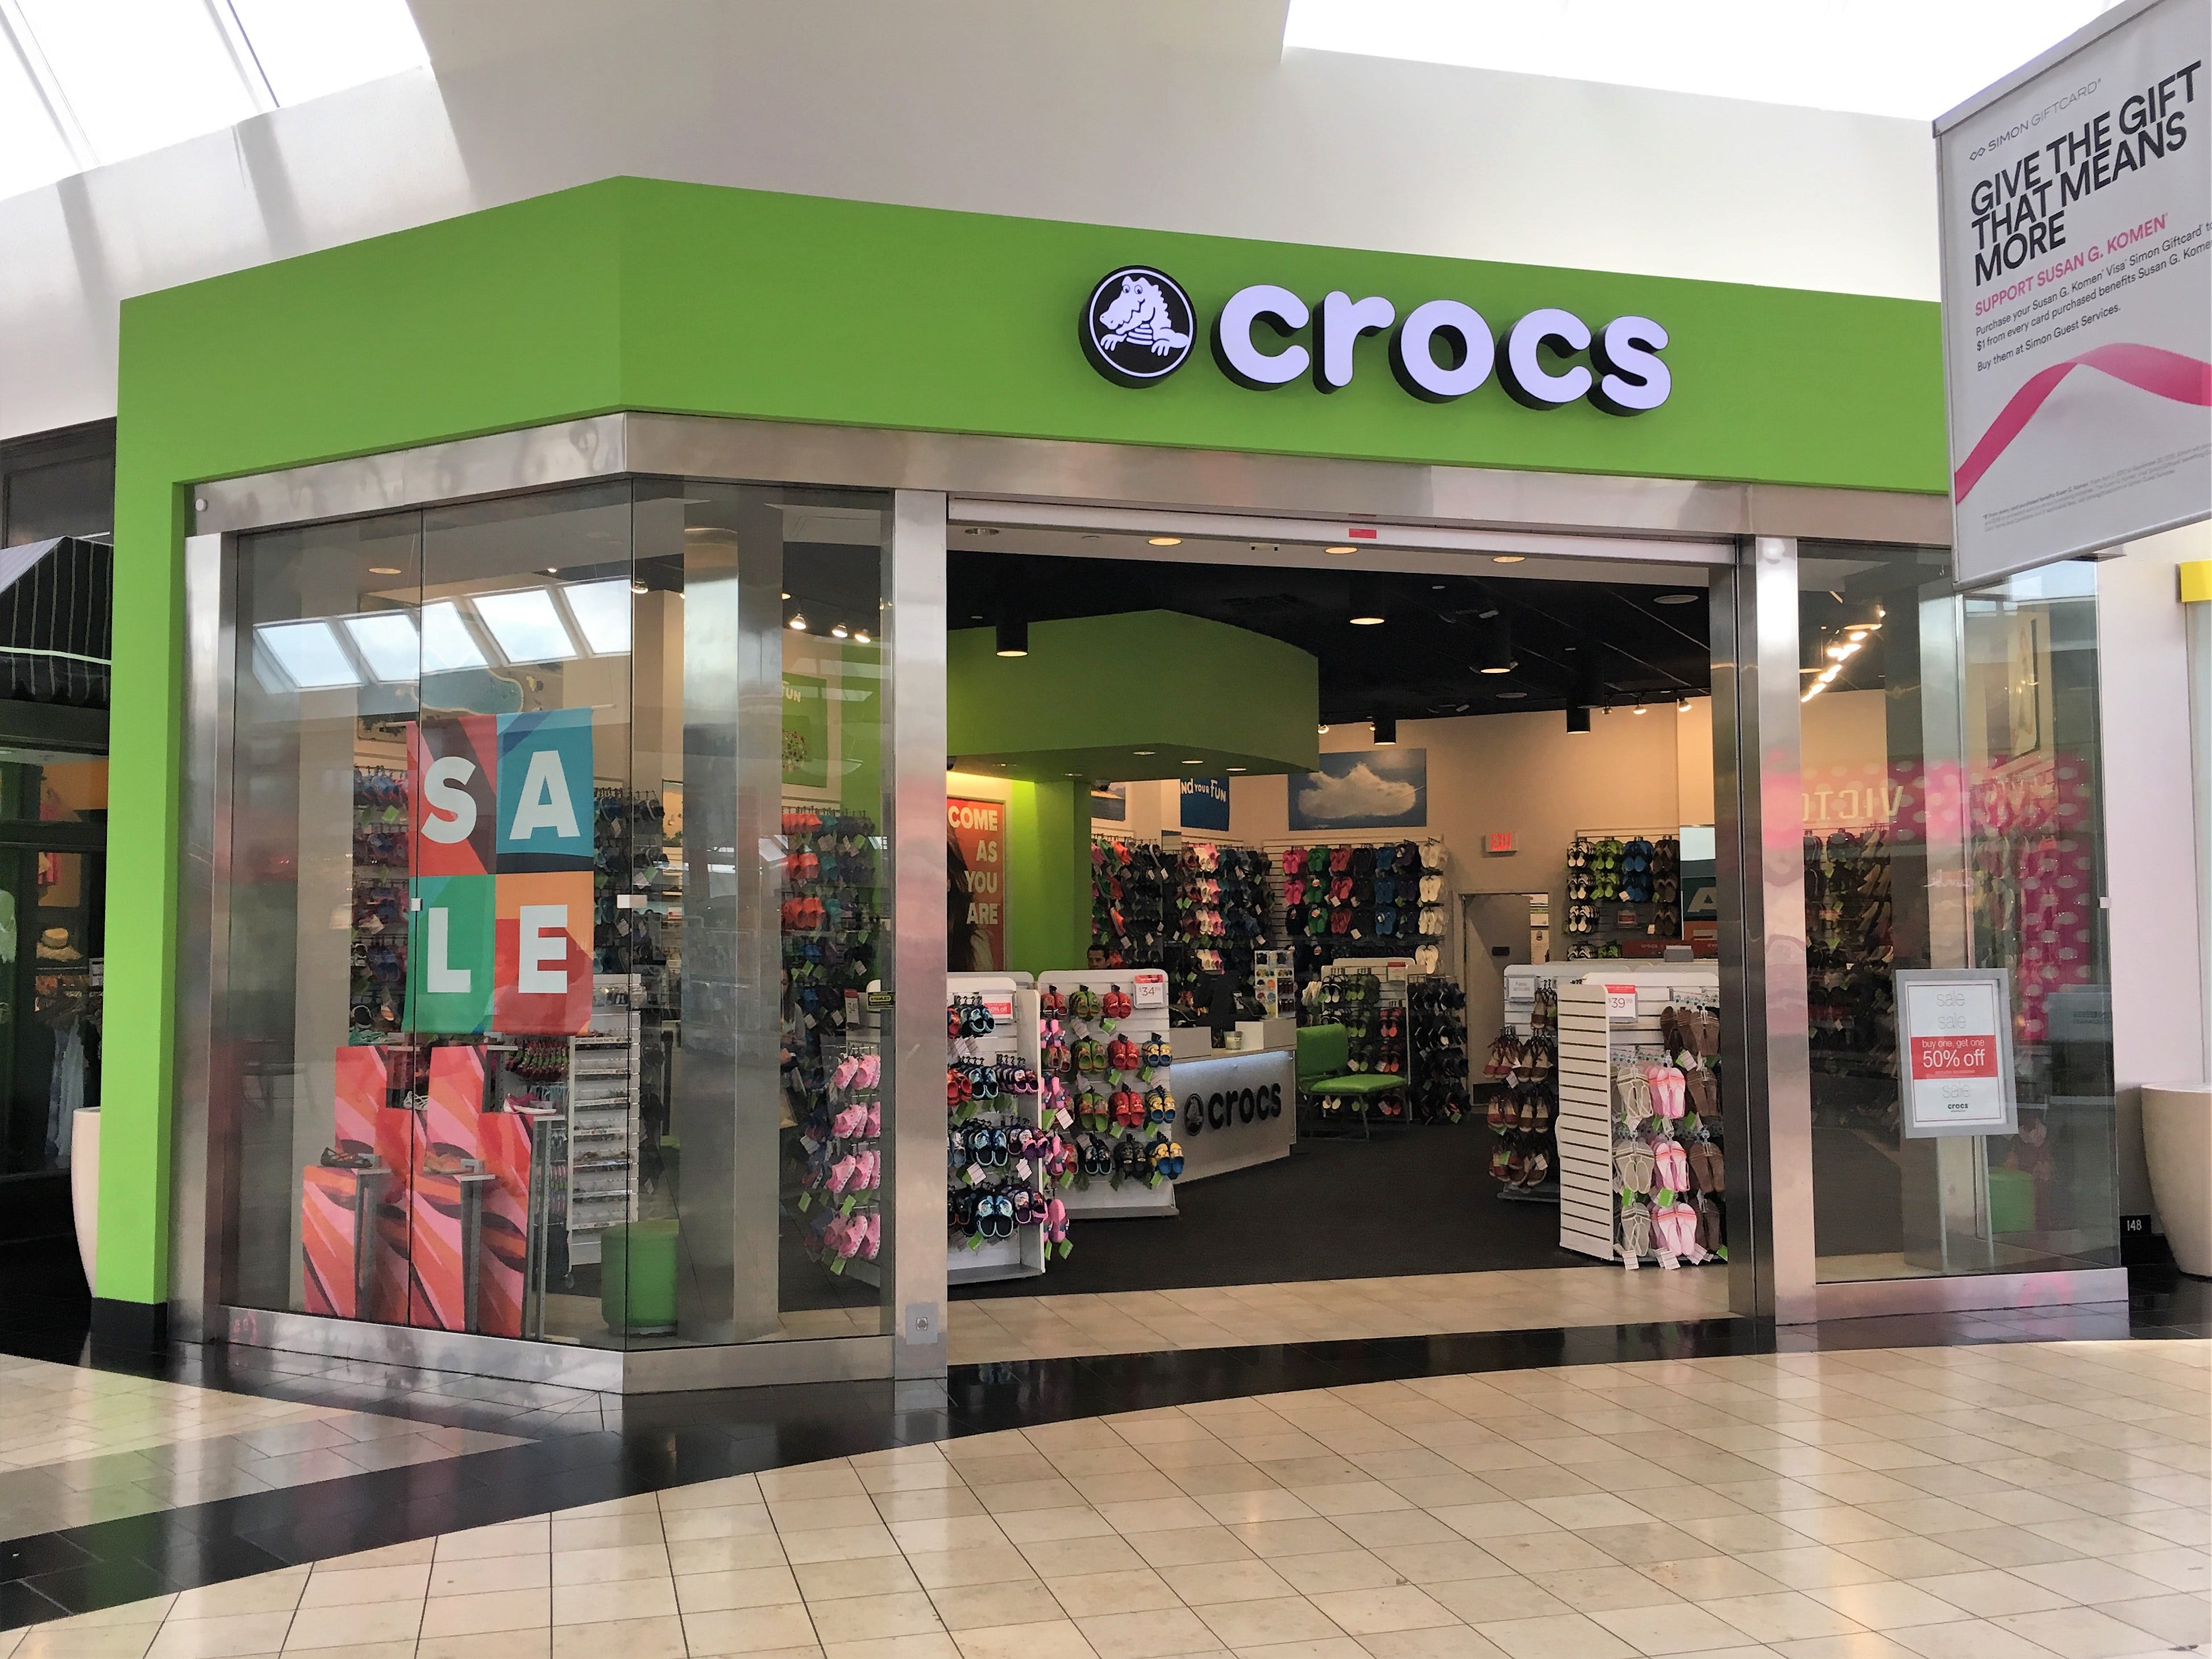 Crocs' Stronger-Than-Anticipated Q4 & Revenue Diversification Progress Trigger 44% Price Target Boost By This Analyst